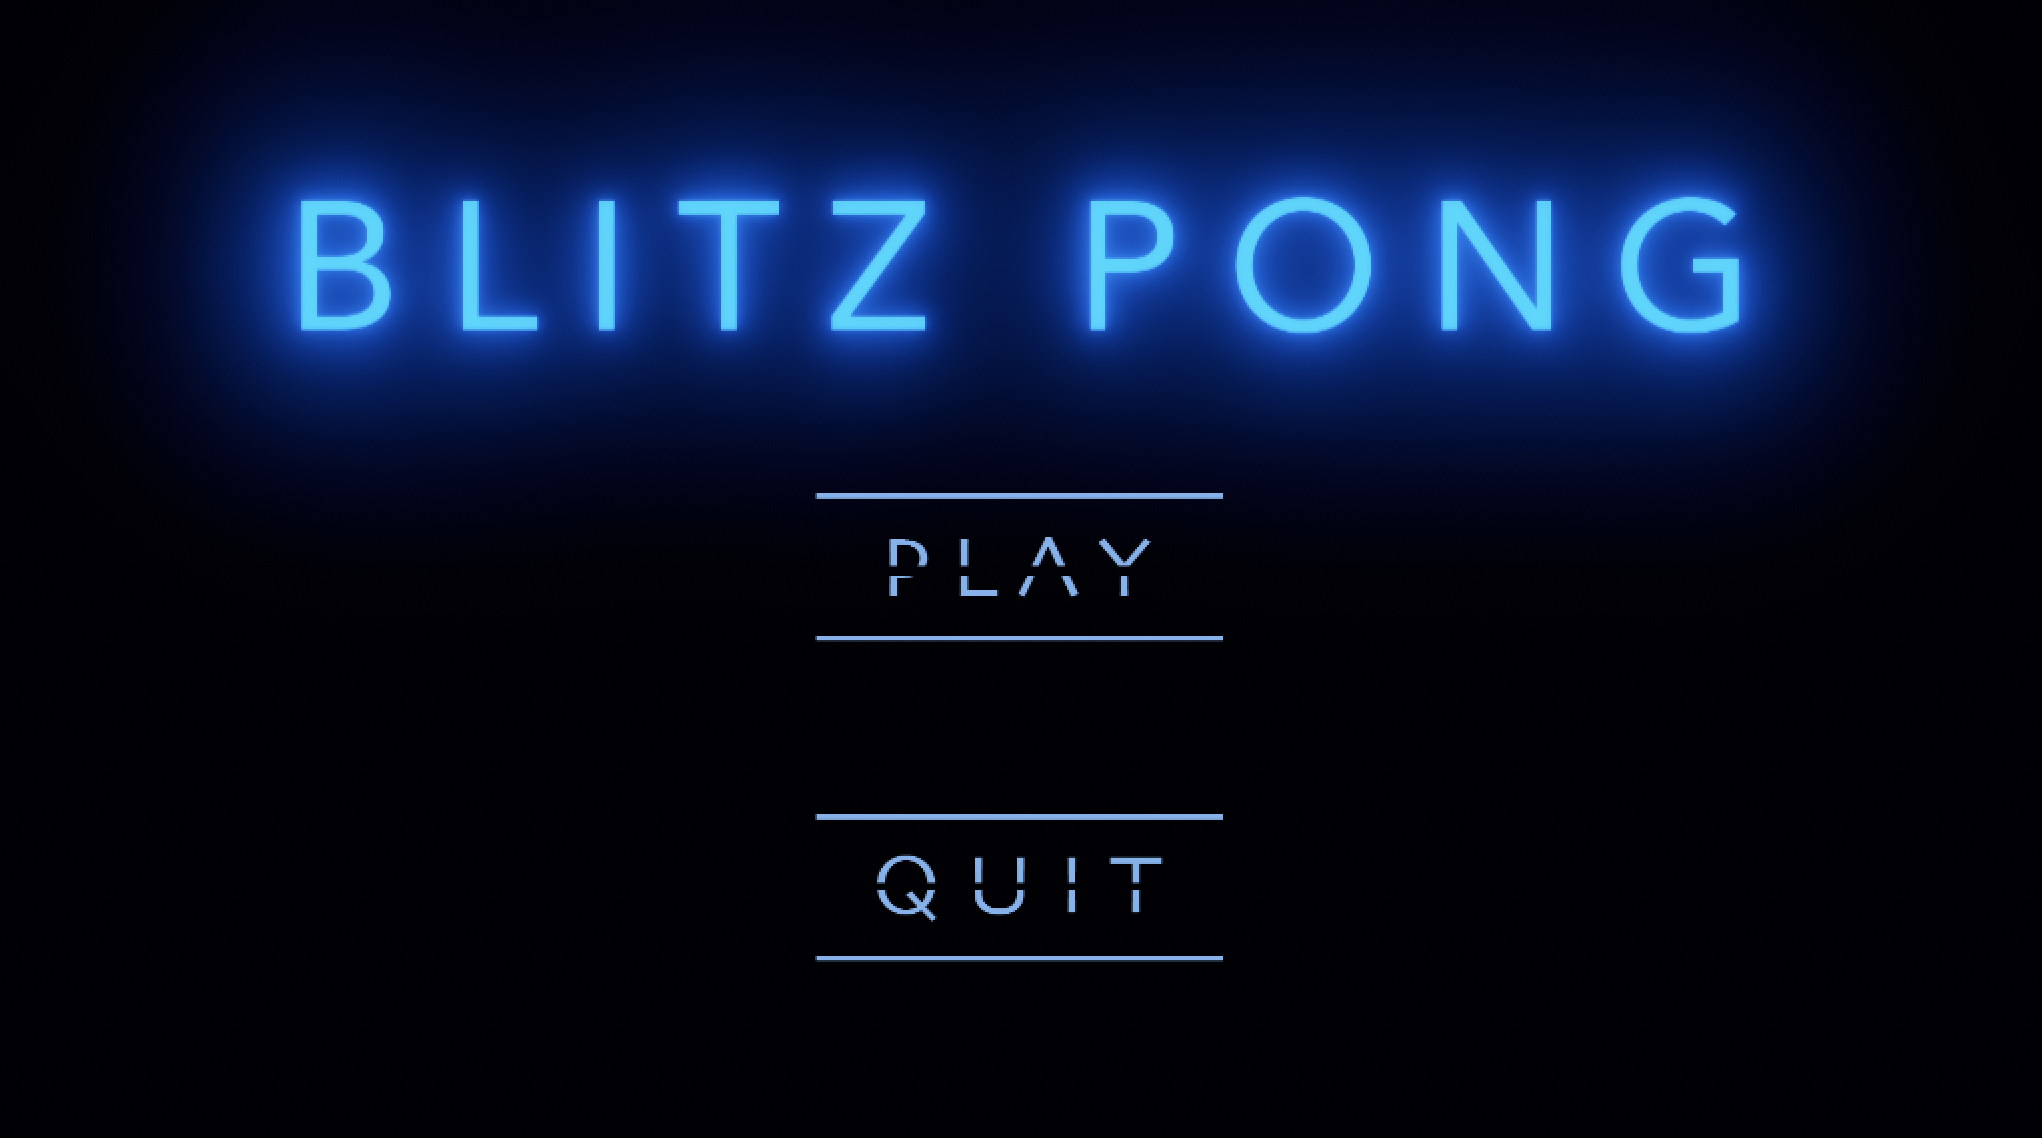 image from Blitz Pong